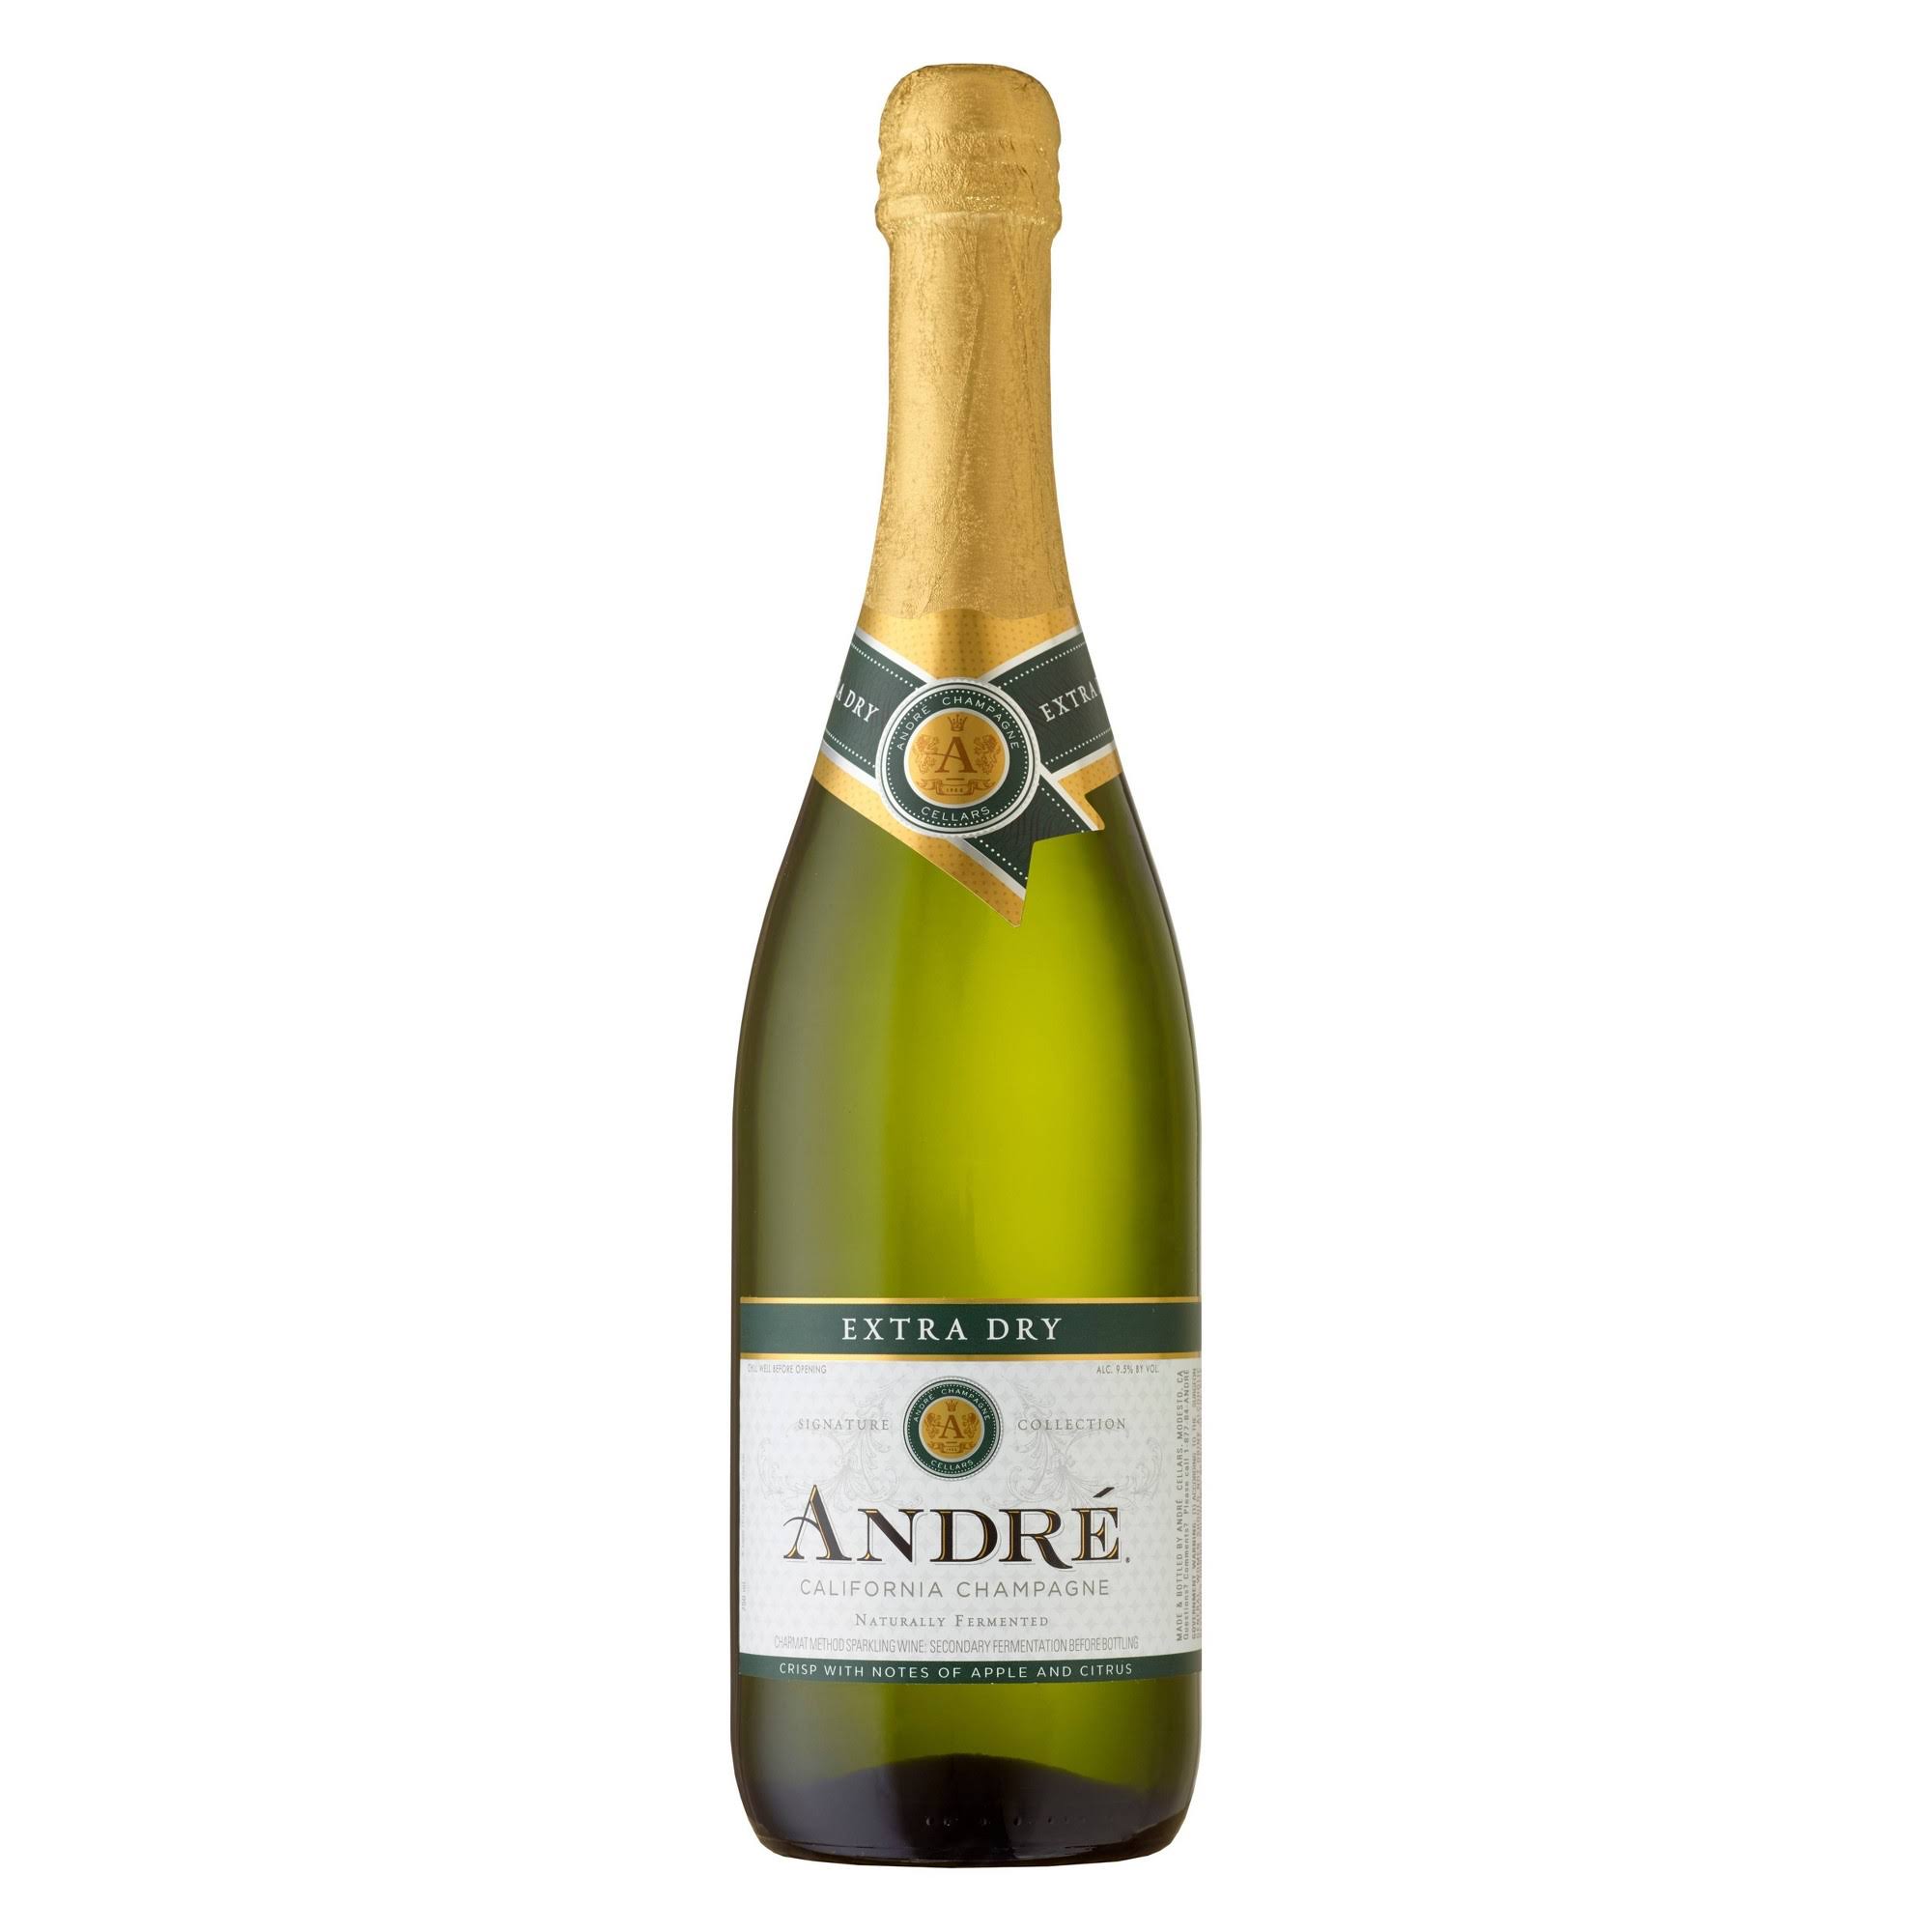 Andre Extra Dry Champagne - California, USA